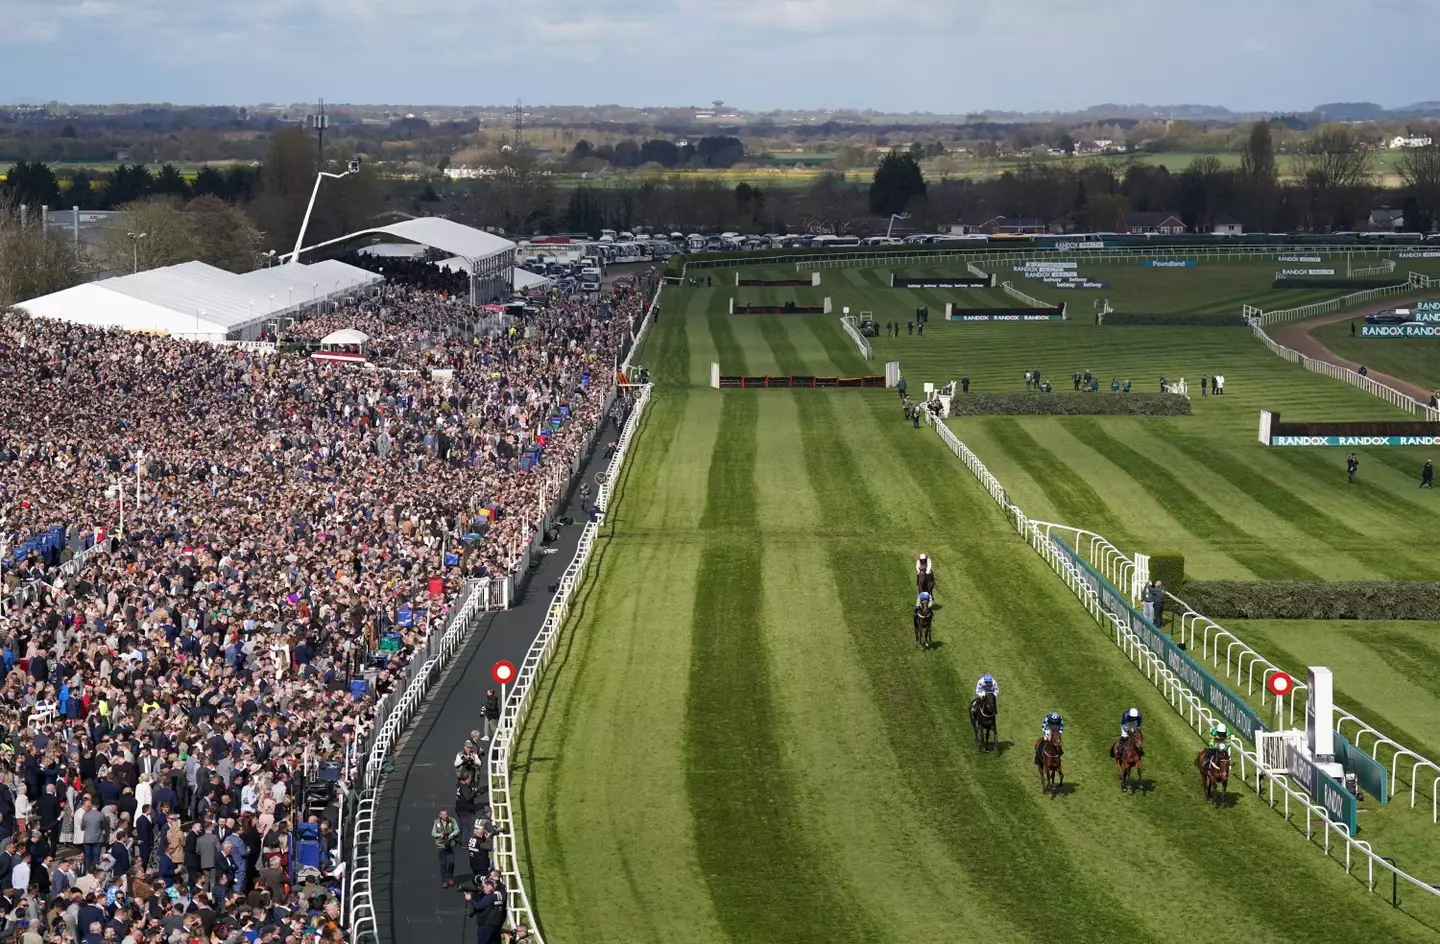 Thousands gathered for the race at Aintree.